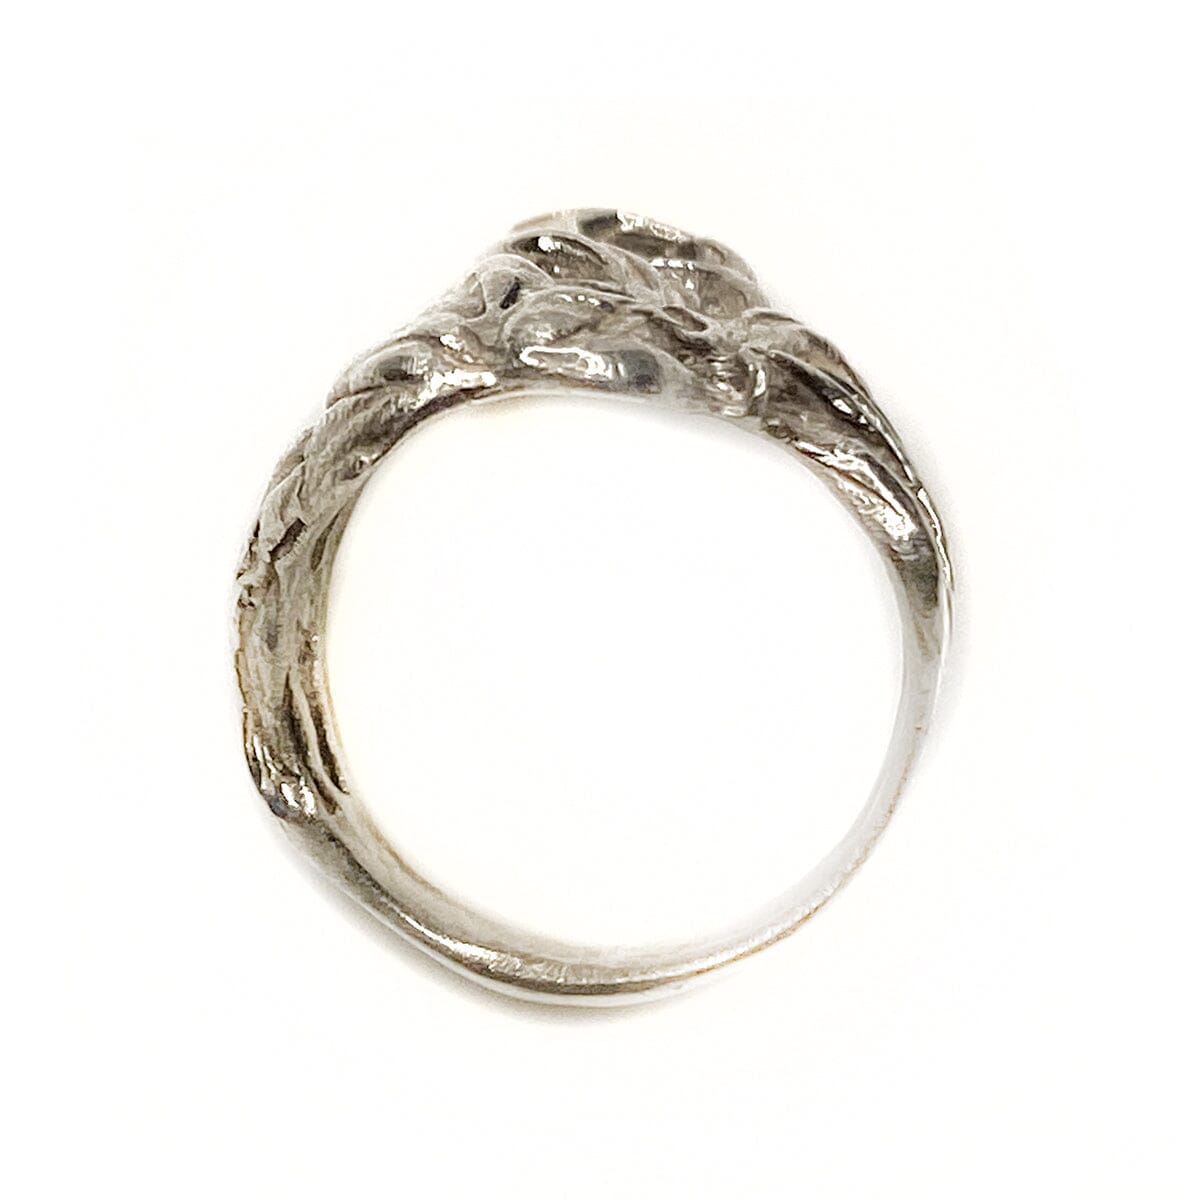 Great Lakes Boutique Handmade Fantasy Silver Ring #1